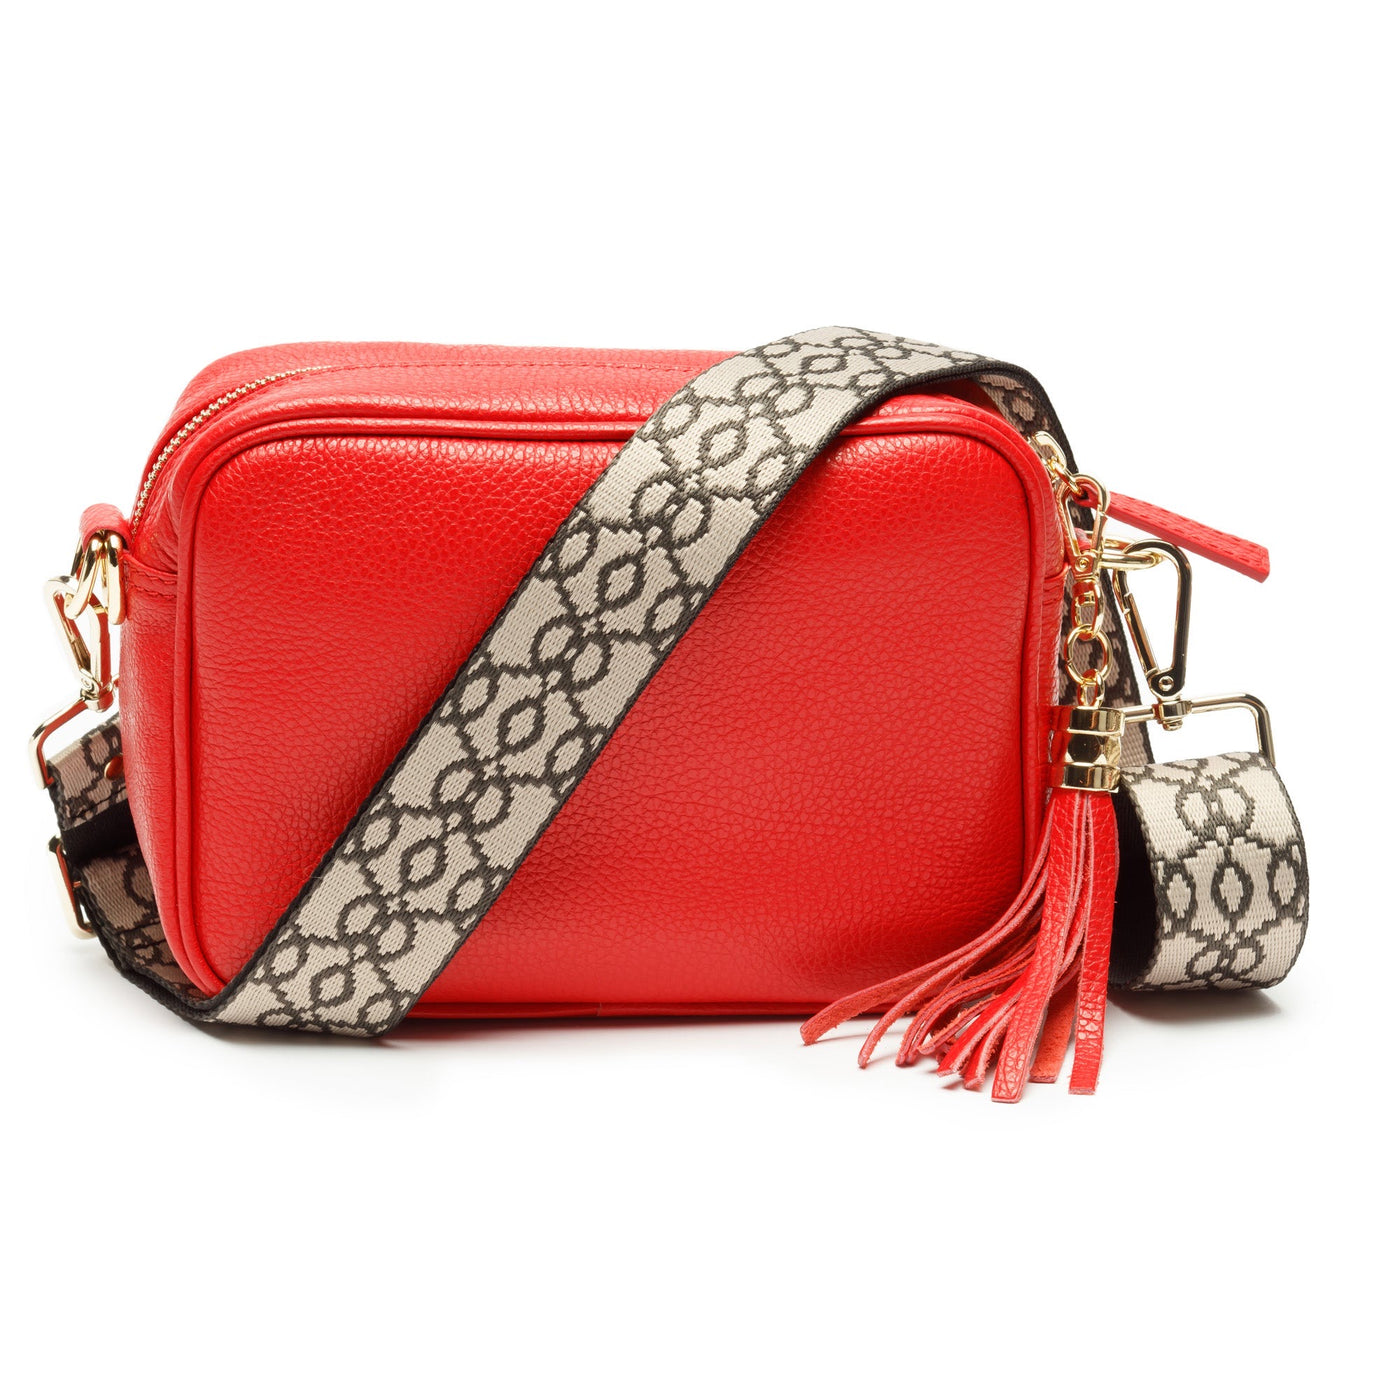 Elie Beaumont Designer Leather Crossbody Bag - Bright Red (GOLD Fittings)